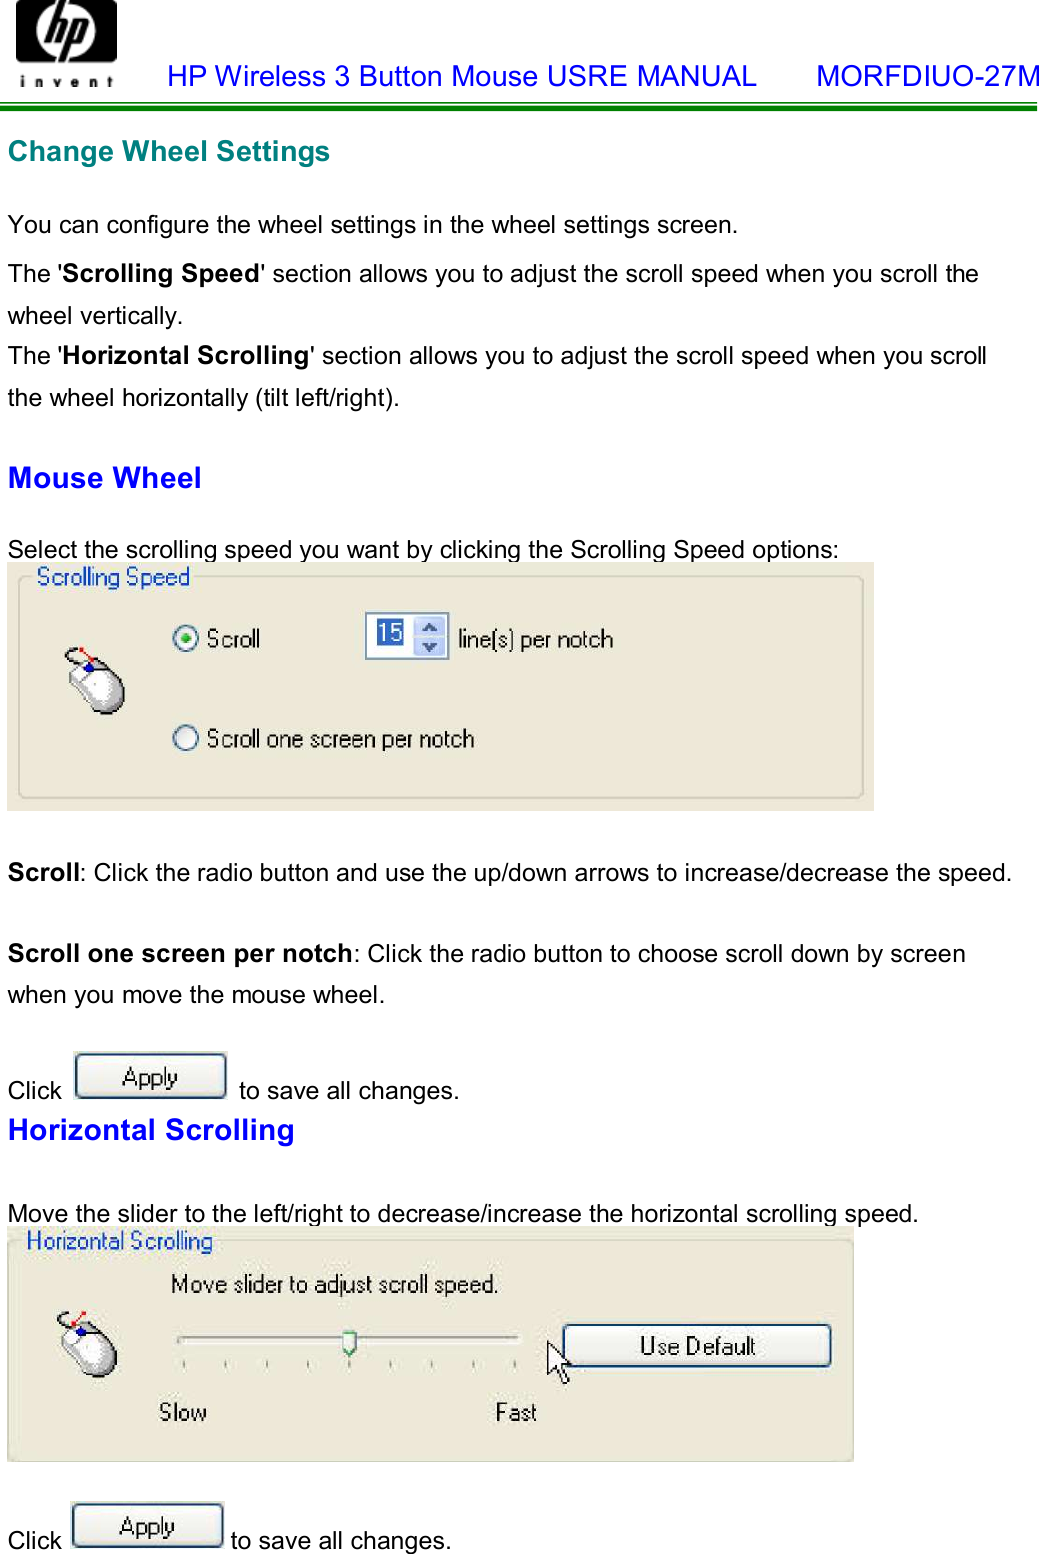    HP Wireless 3 Button Mouse USRE MANUAL    MORFDIUO-27M    Change Wheel Settings   You can configure the wheel settings in the wheel settings screen.  The &apos;Scrolling Speed&apos; section allows you to adjust the scroll speed when you scroll the wheel vertically. The &apos;Horizontal Scrolling&apos; section allows you to adjust the scroll speed when you scroll  the wheel horizontally (tilt left/right).  Mouse Wheel   Select the scrolling speed you want by clicking the Scrolling Speed options:    Scroll: Click the radio button and use the up/down arrows to increase/decrease the speed.   Scroll one screen per notch: Click the radio button to choose scroll down by screen when you move the mouse wheel.  Click   to save all changes. Horizontal Scrolling   Move the slider to the left/right to decrease/increase the horizontal scrolling speed.     Click  to save all changes.  